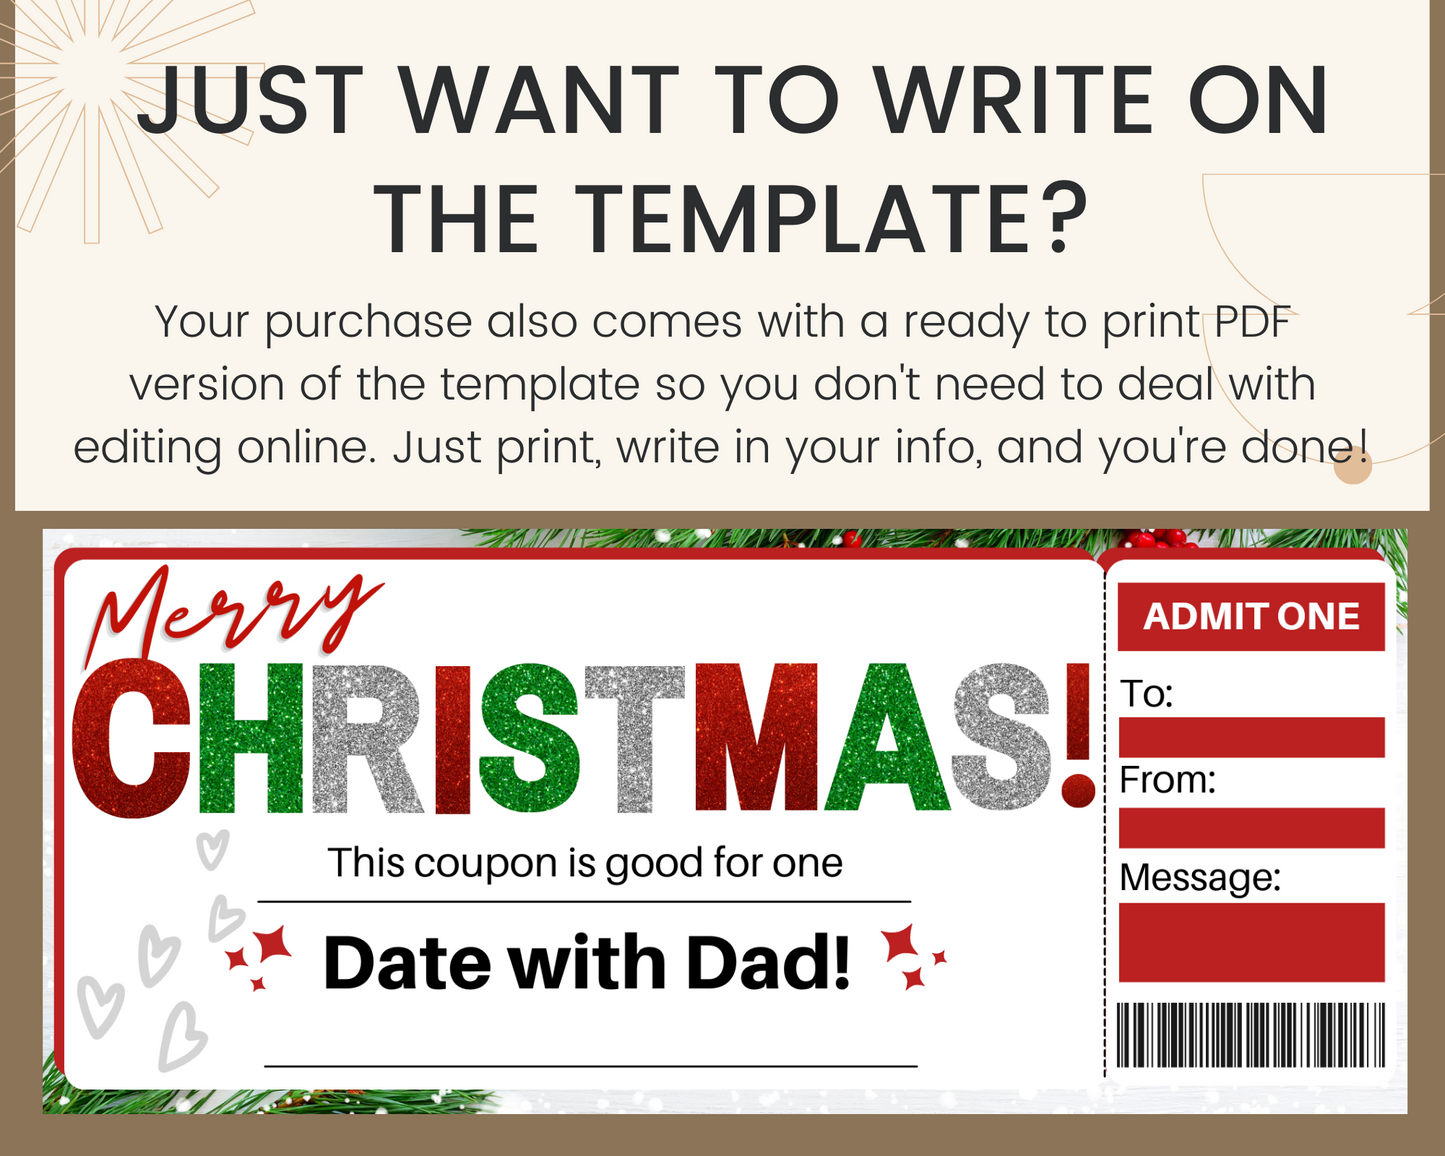 Christmas Date with Dad Gift Coupon